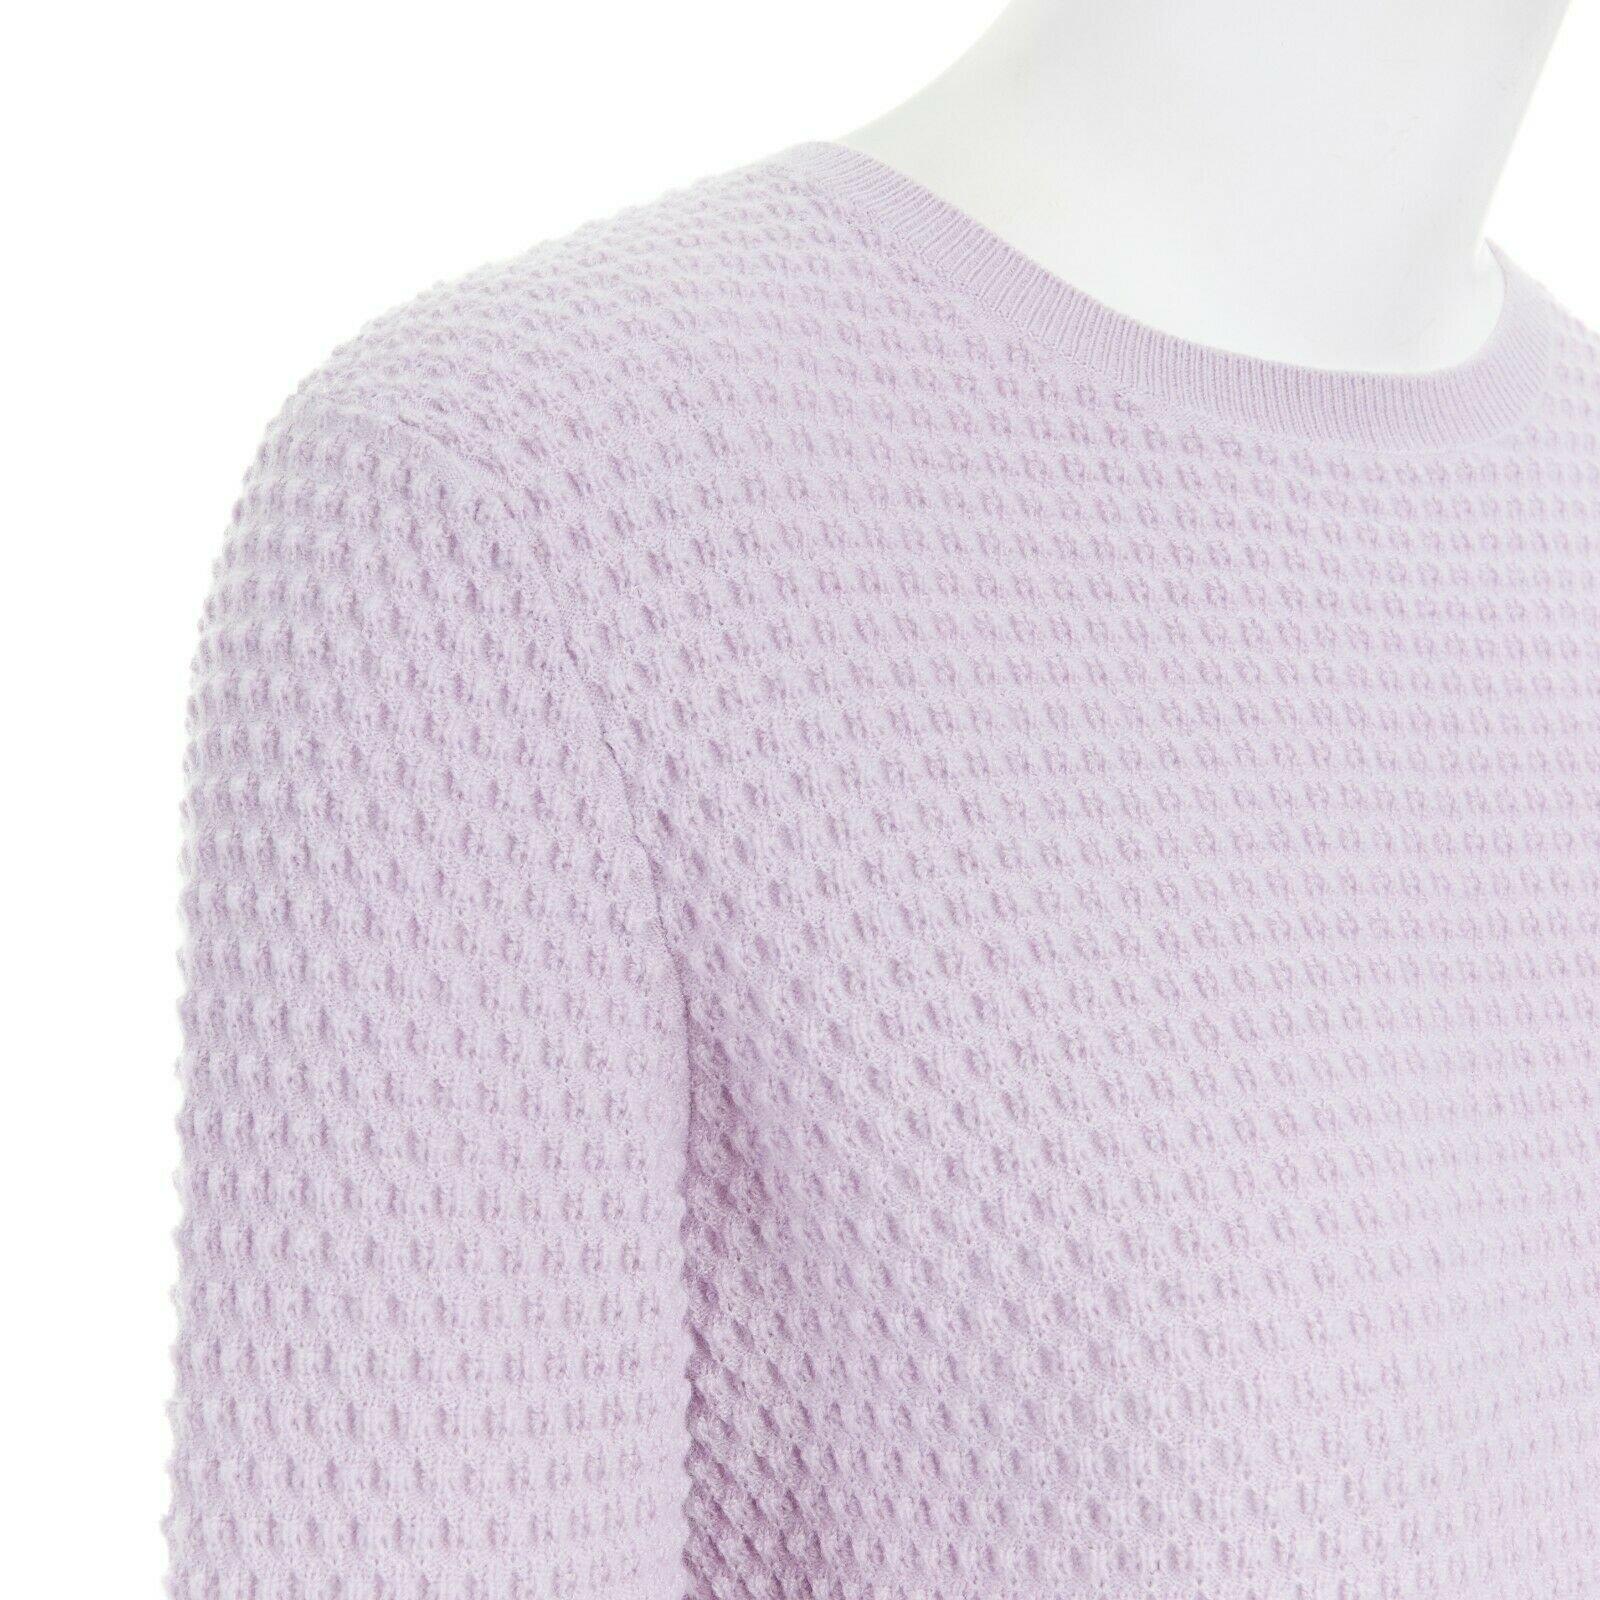 Women's CARVEN wool blend pastel lilac purple textured knit long sleeve sweater top M